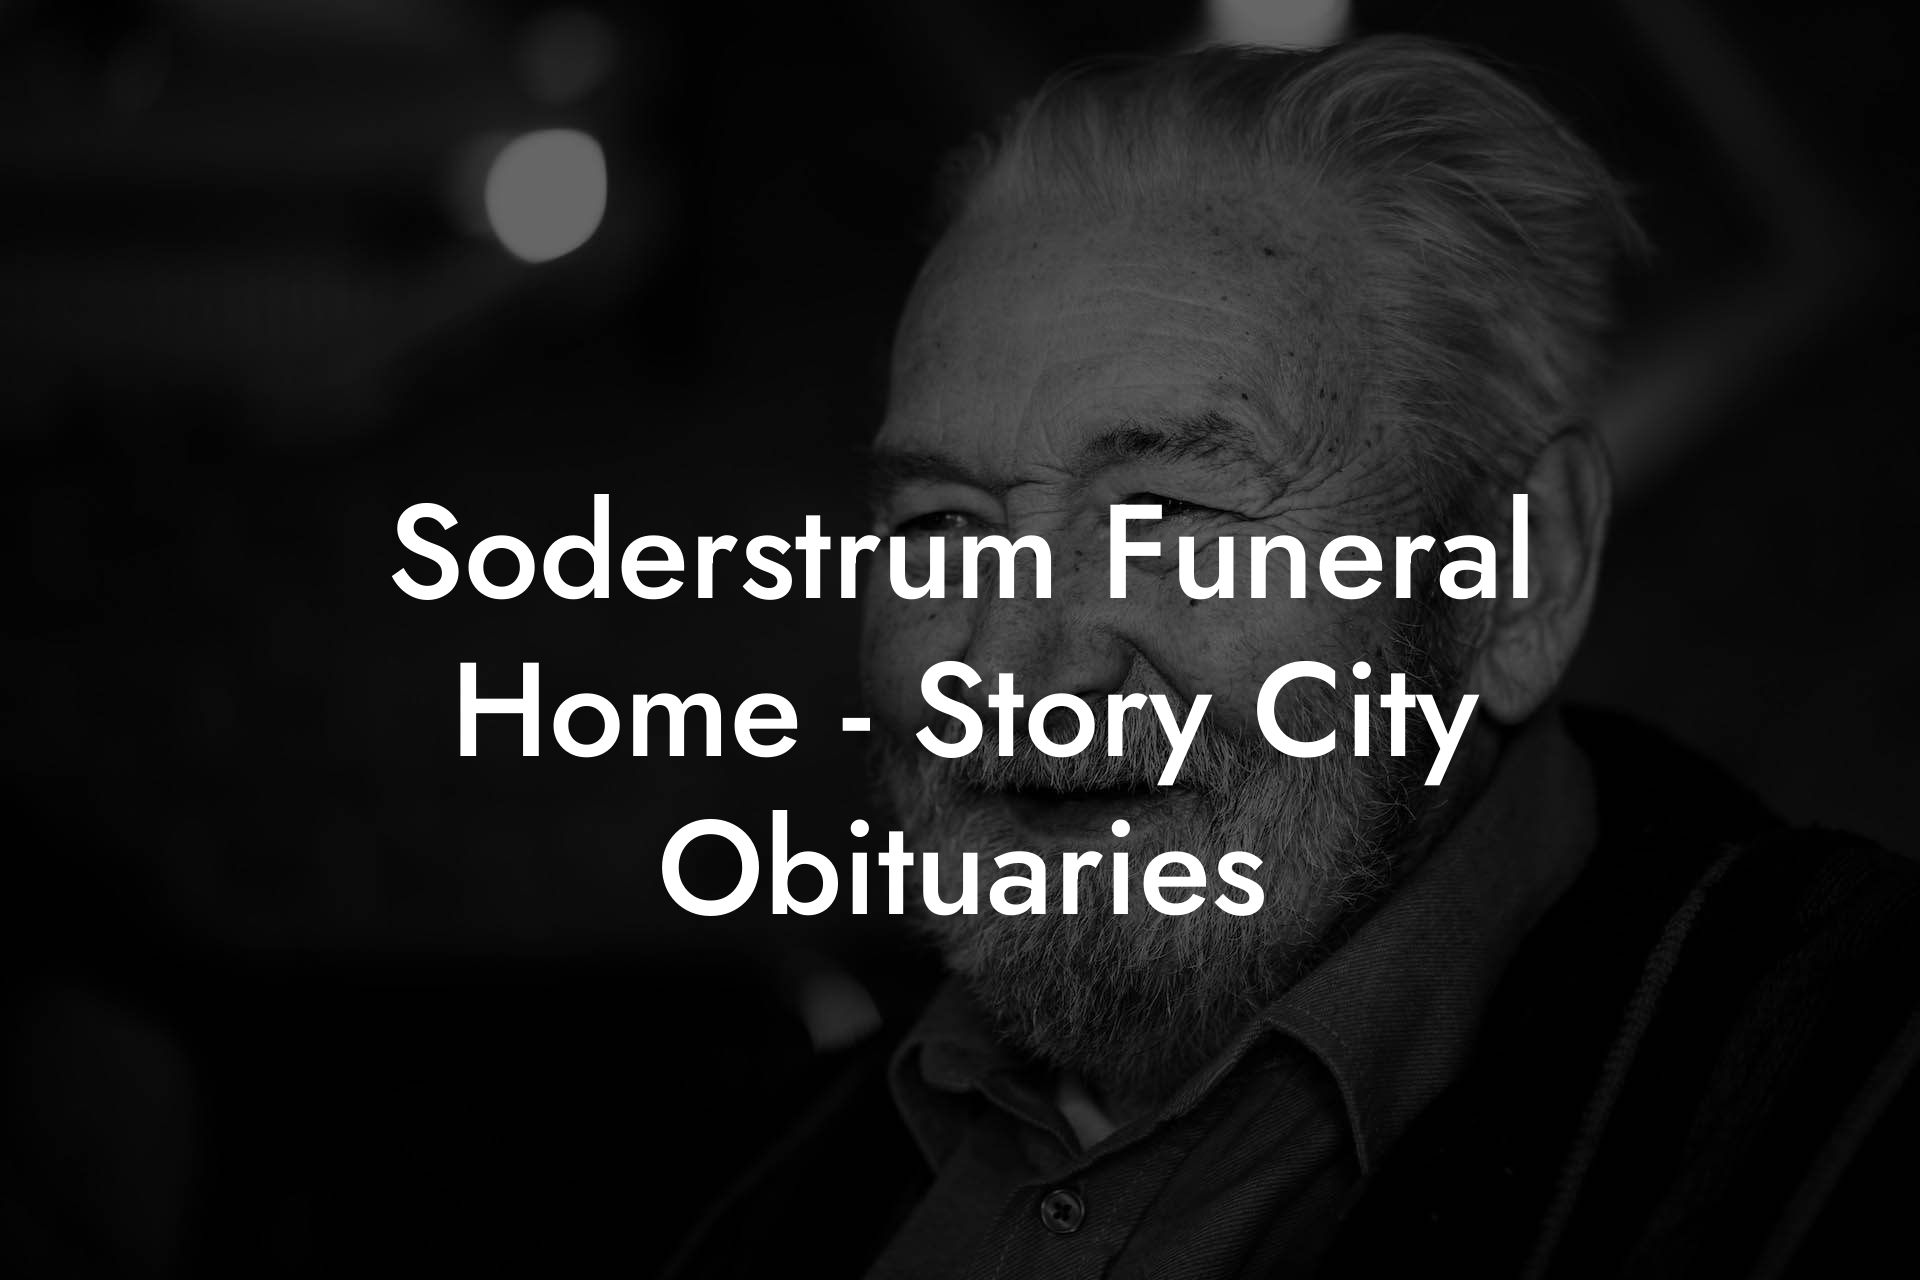 Soderstrum Funeral Home - Story City Obituaries